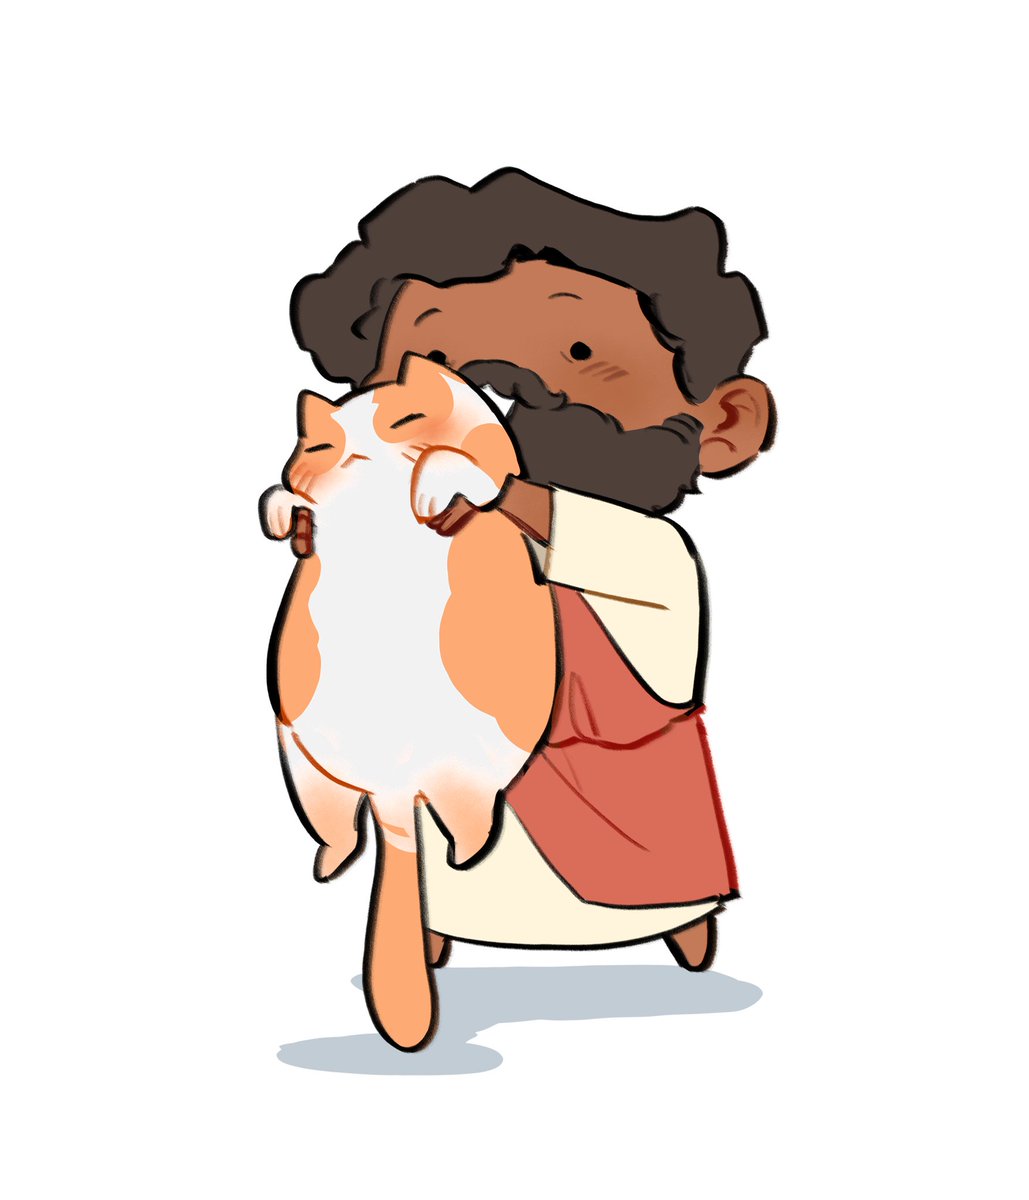 「The Jesus and cat saga continues \o/ I e」|Wolfyのイラスト